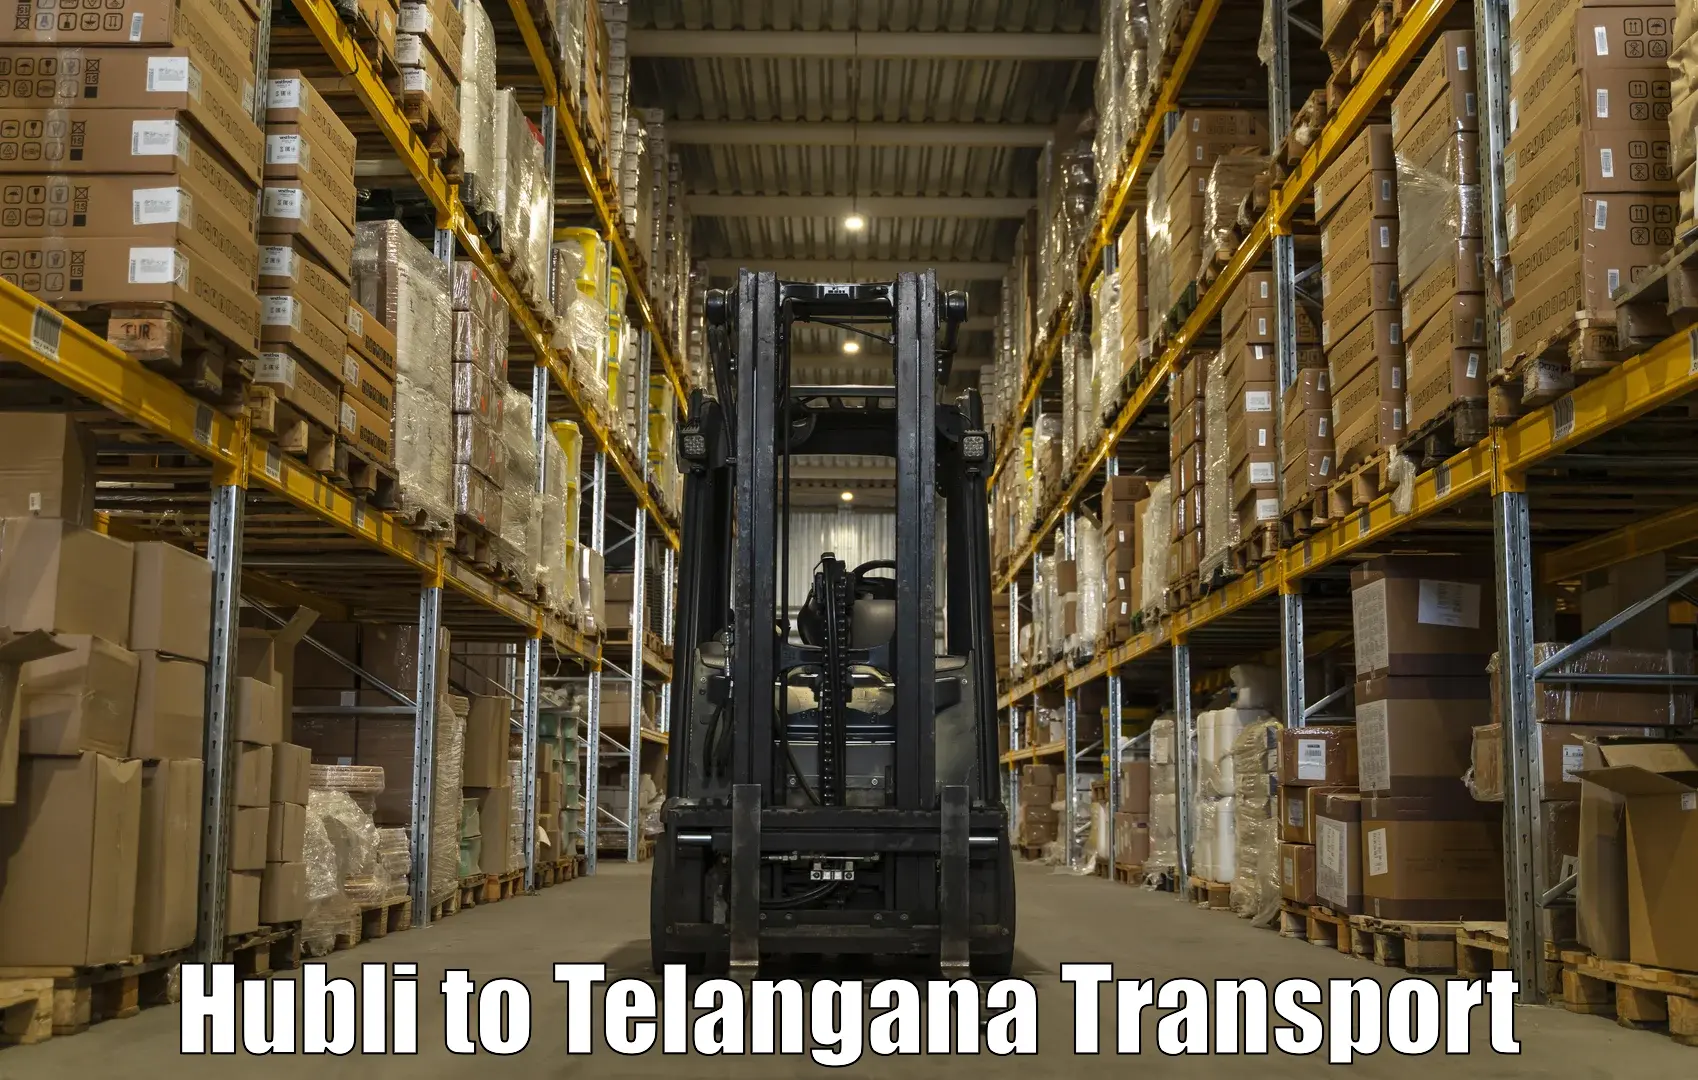 Air cargo transport services Hubli to Hyderabad